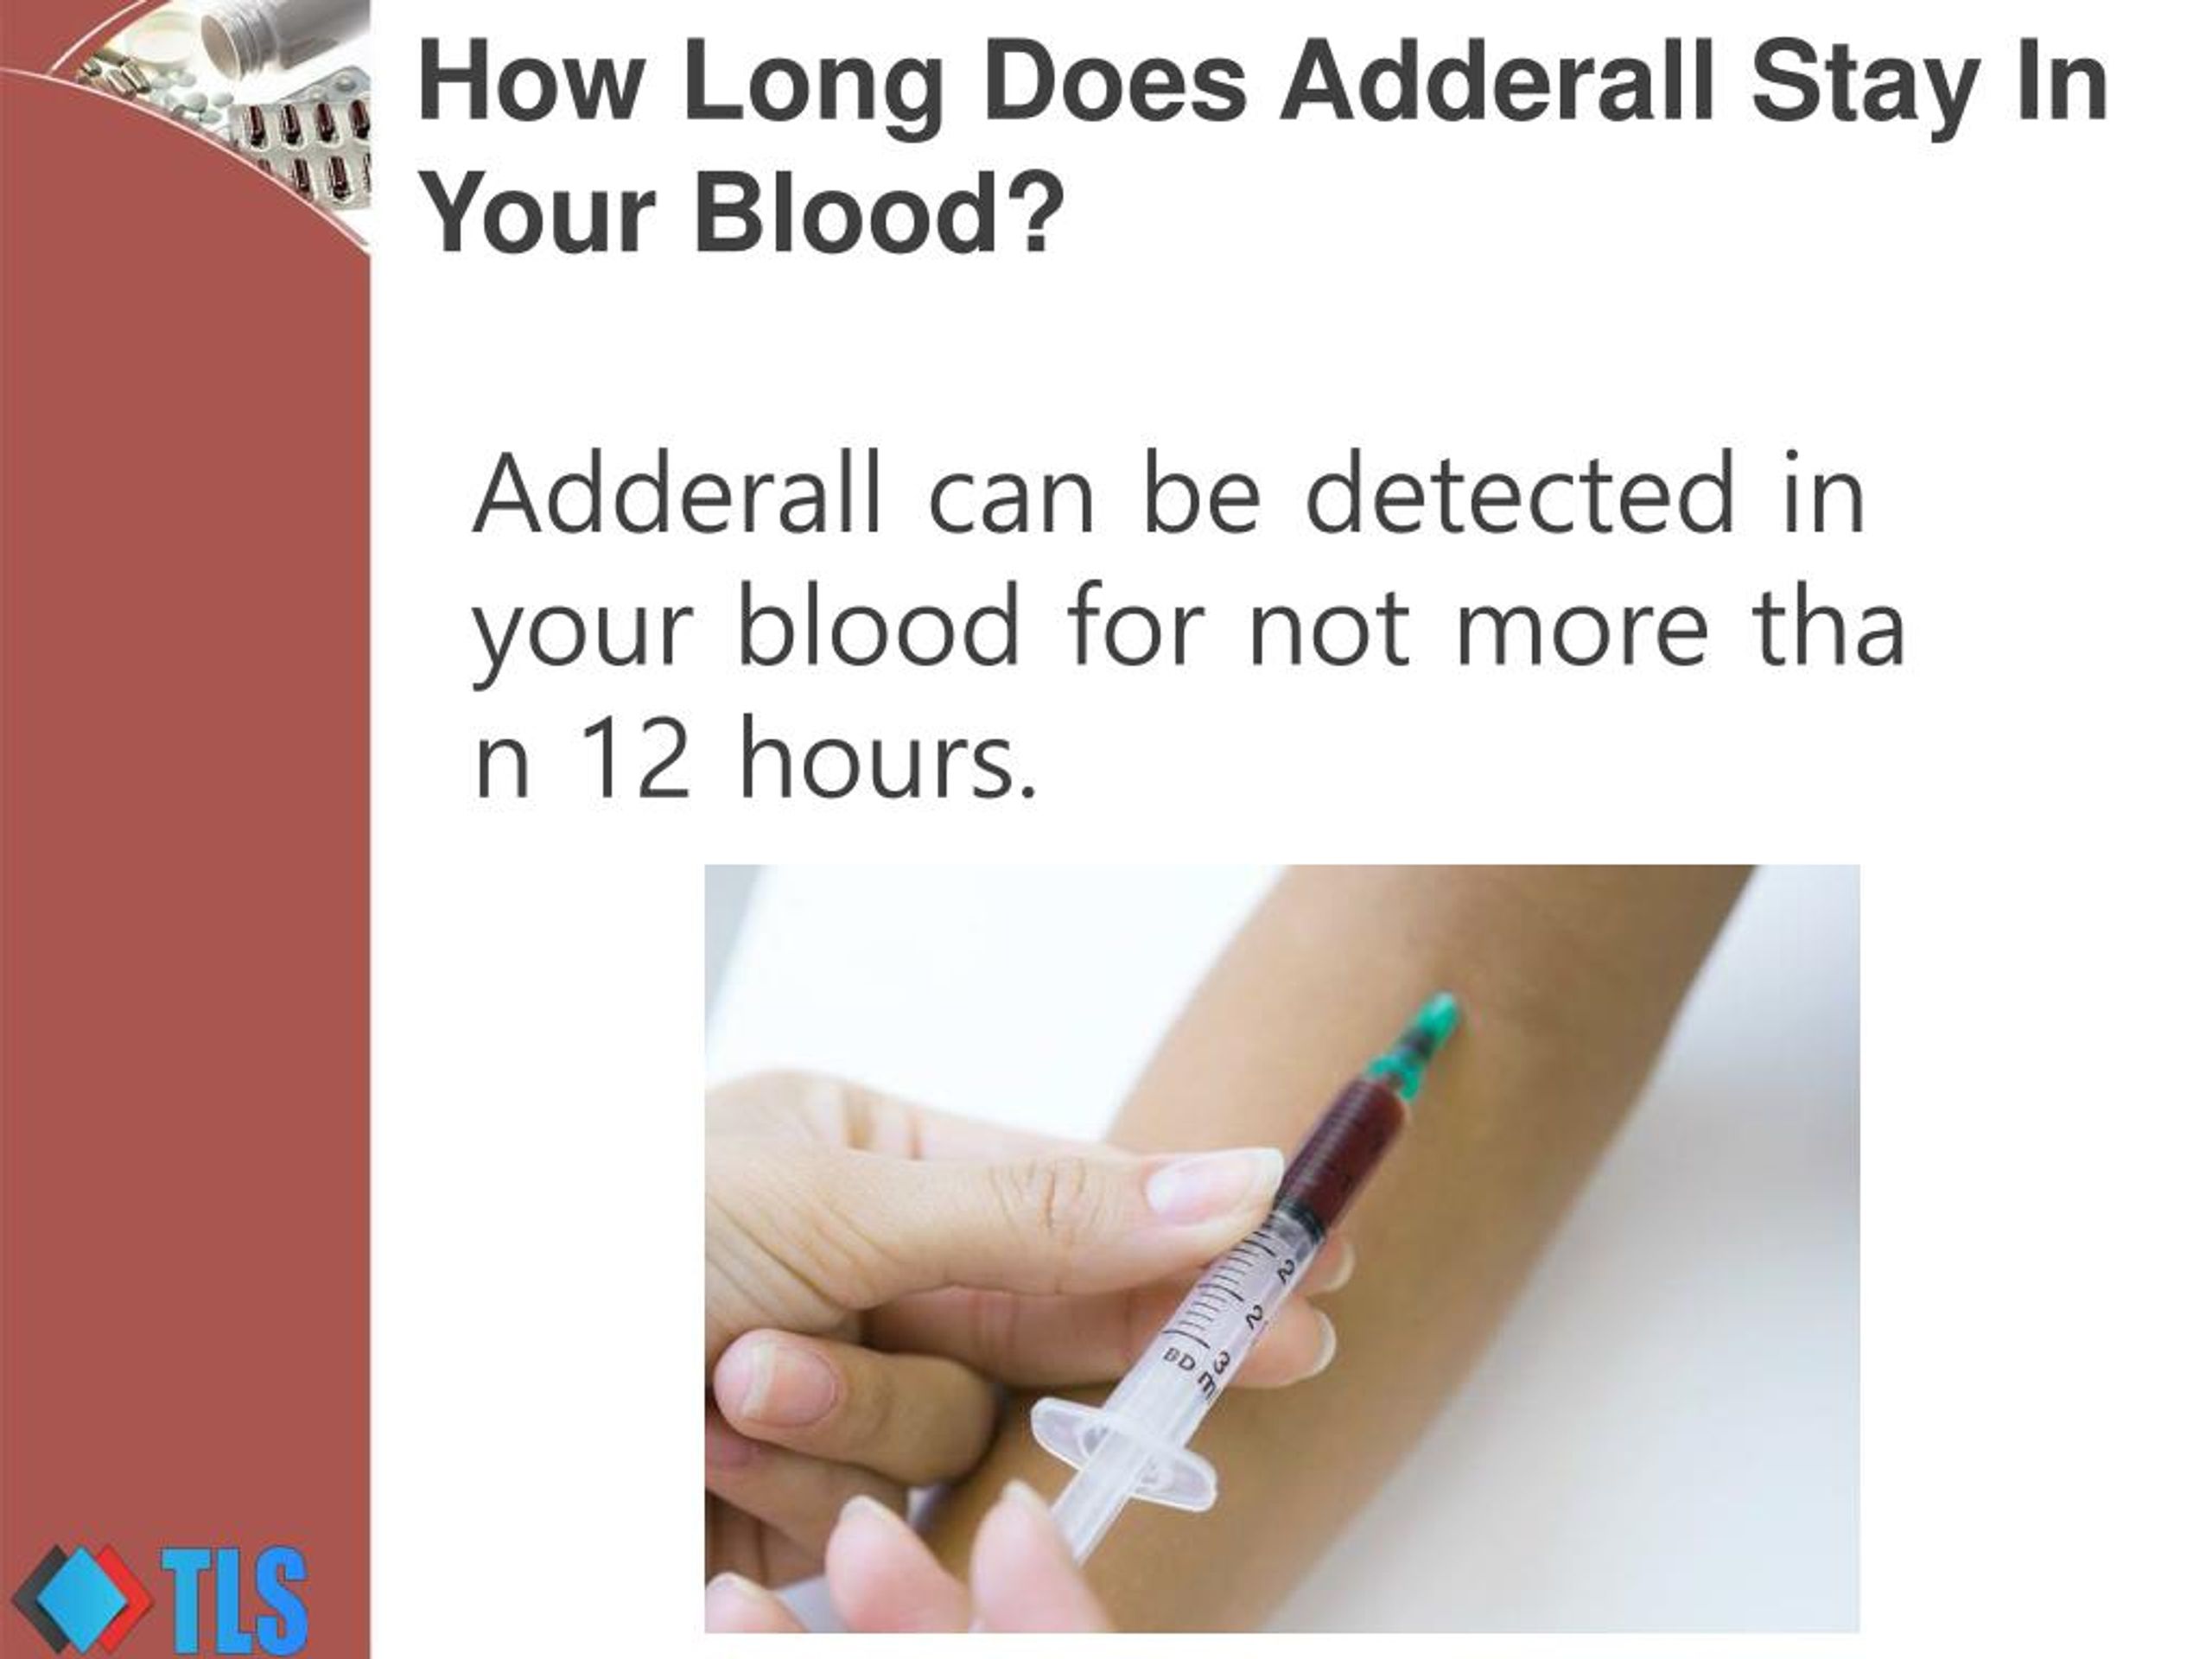 how long does adderall stay in your system for a blood test